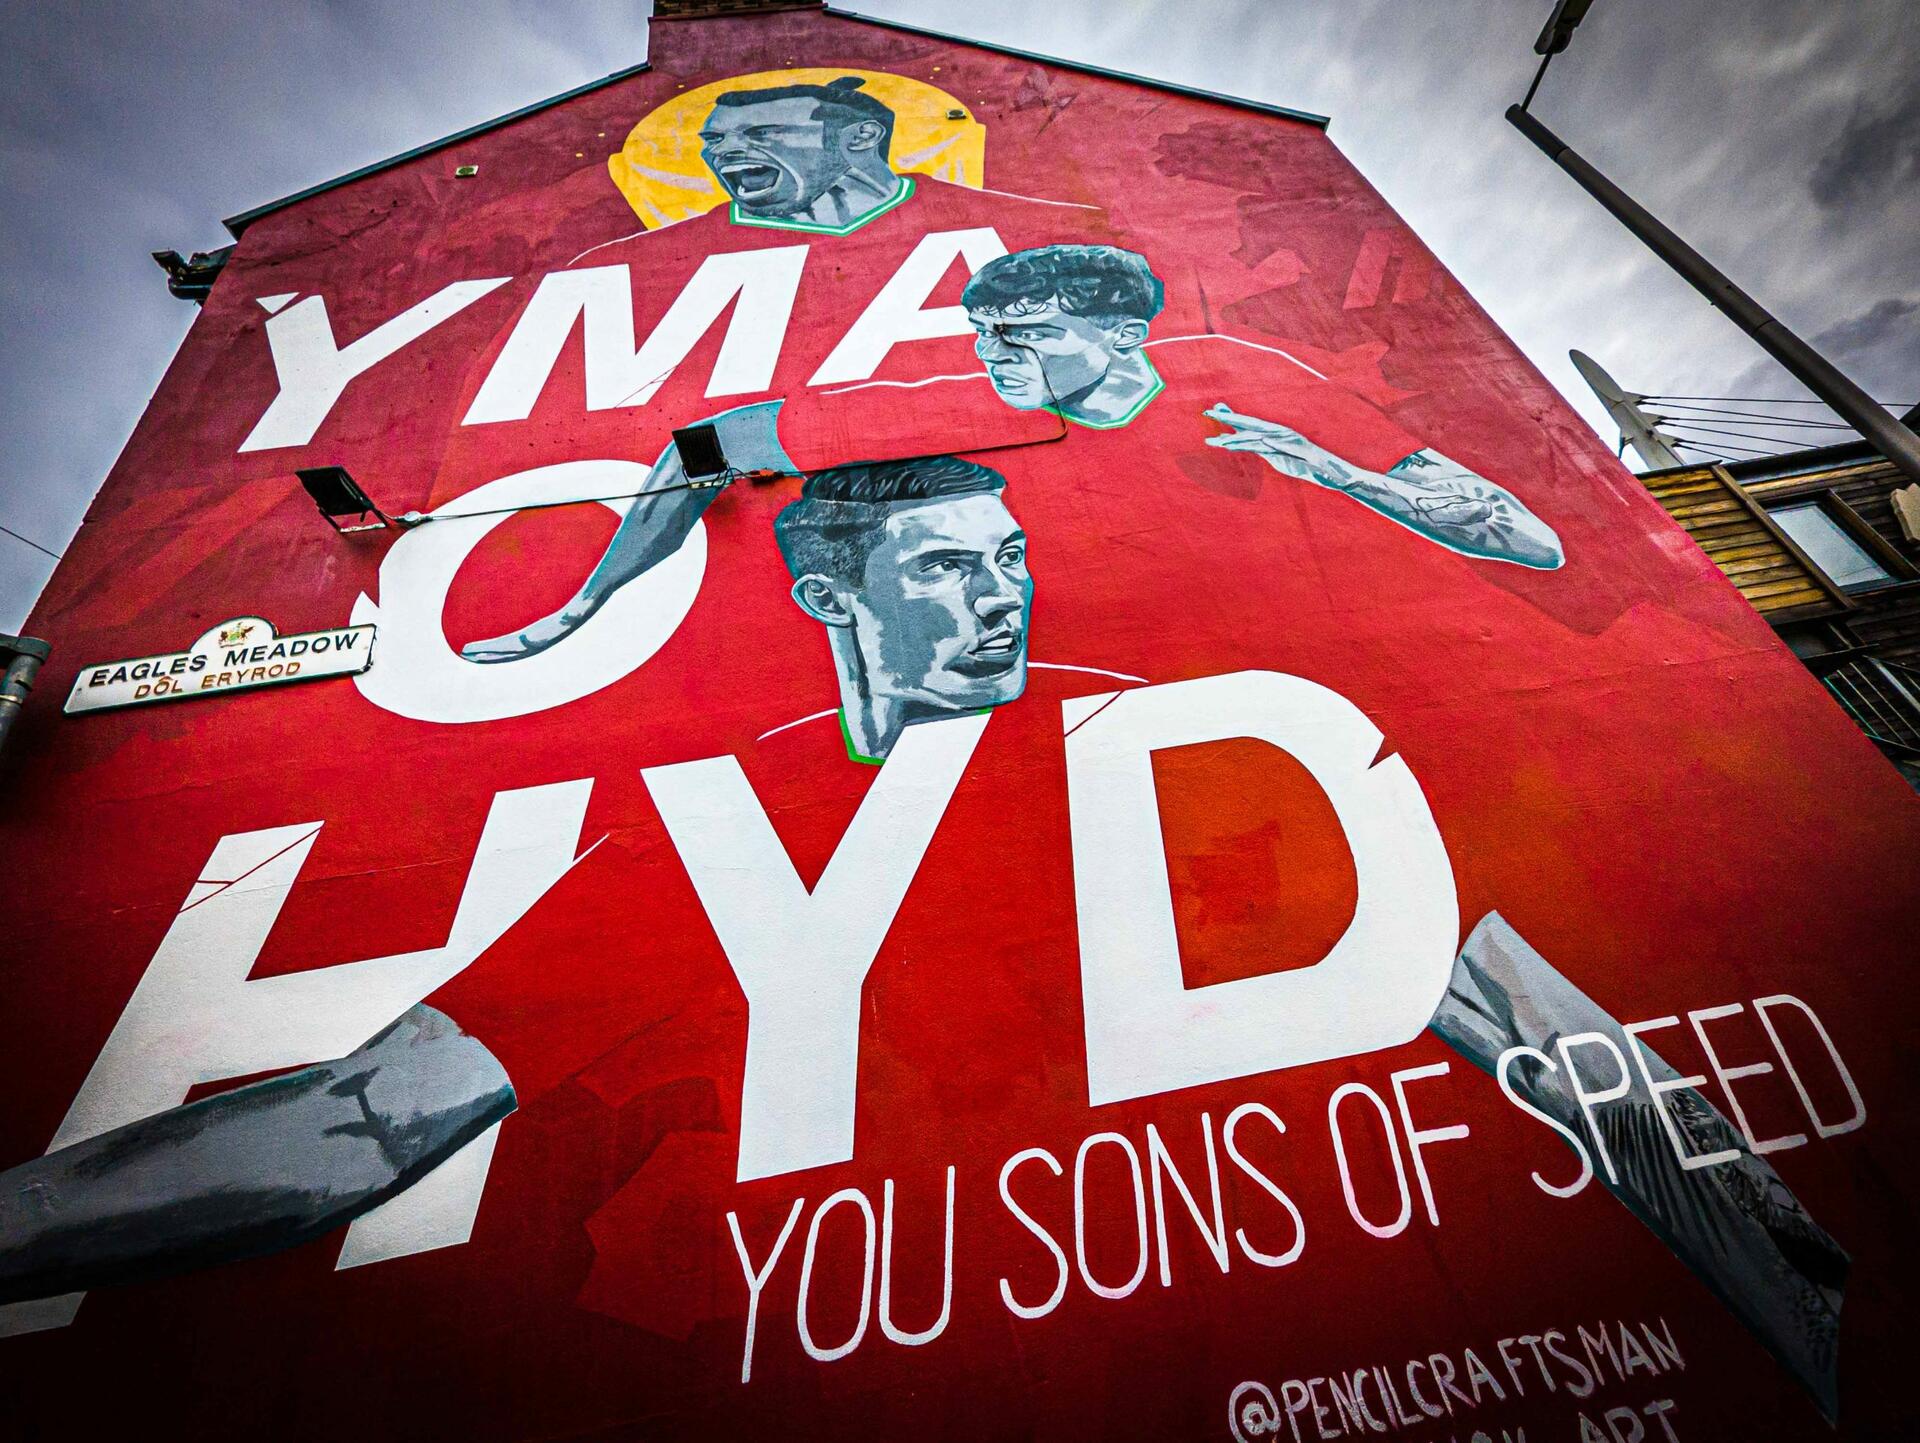 Mural of Welsh football players Gareth Bale, Neco Williams, and Harry Wilson on the side of a building with the words "Yma o Hyd You Sons of Speed."